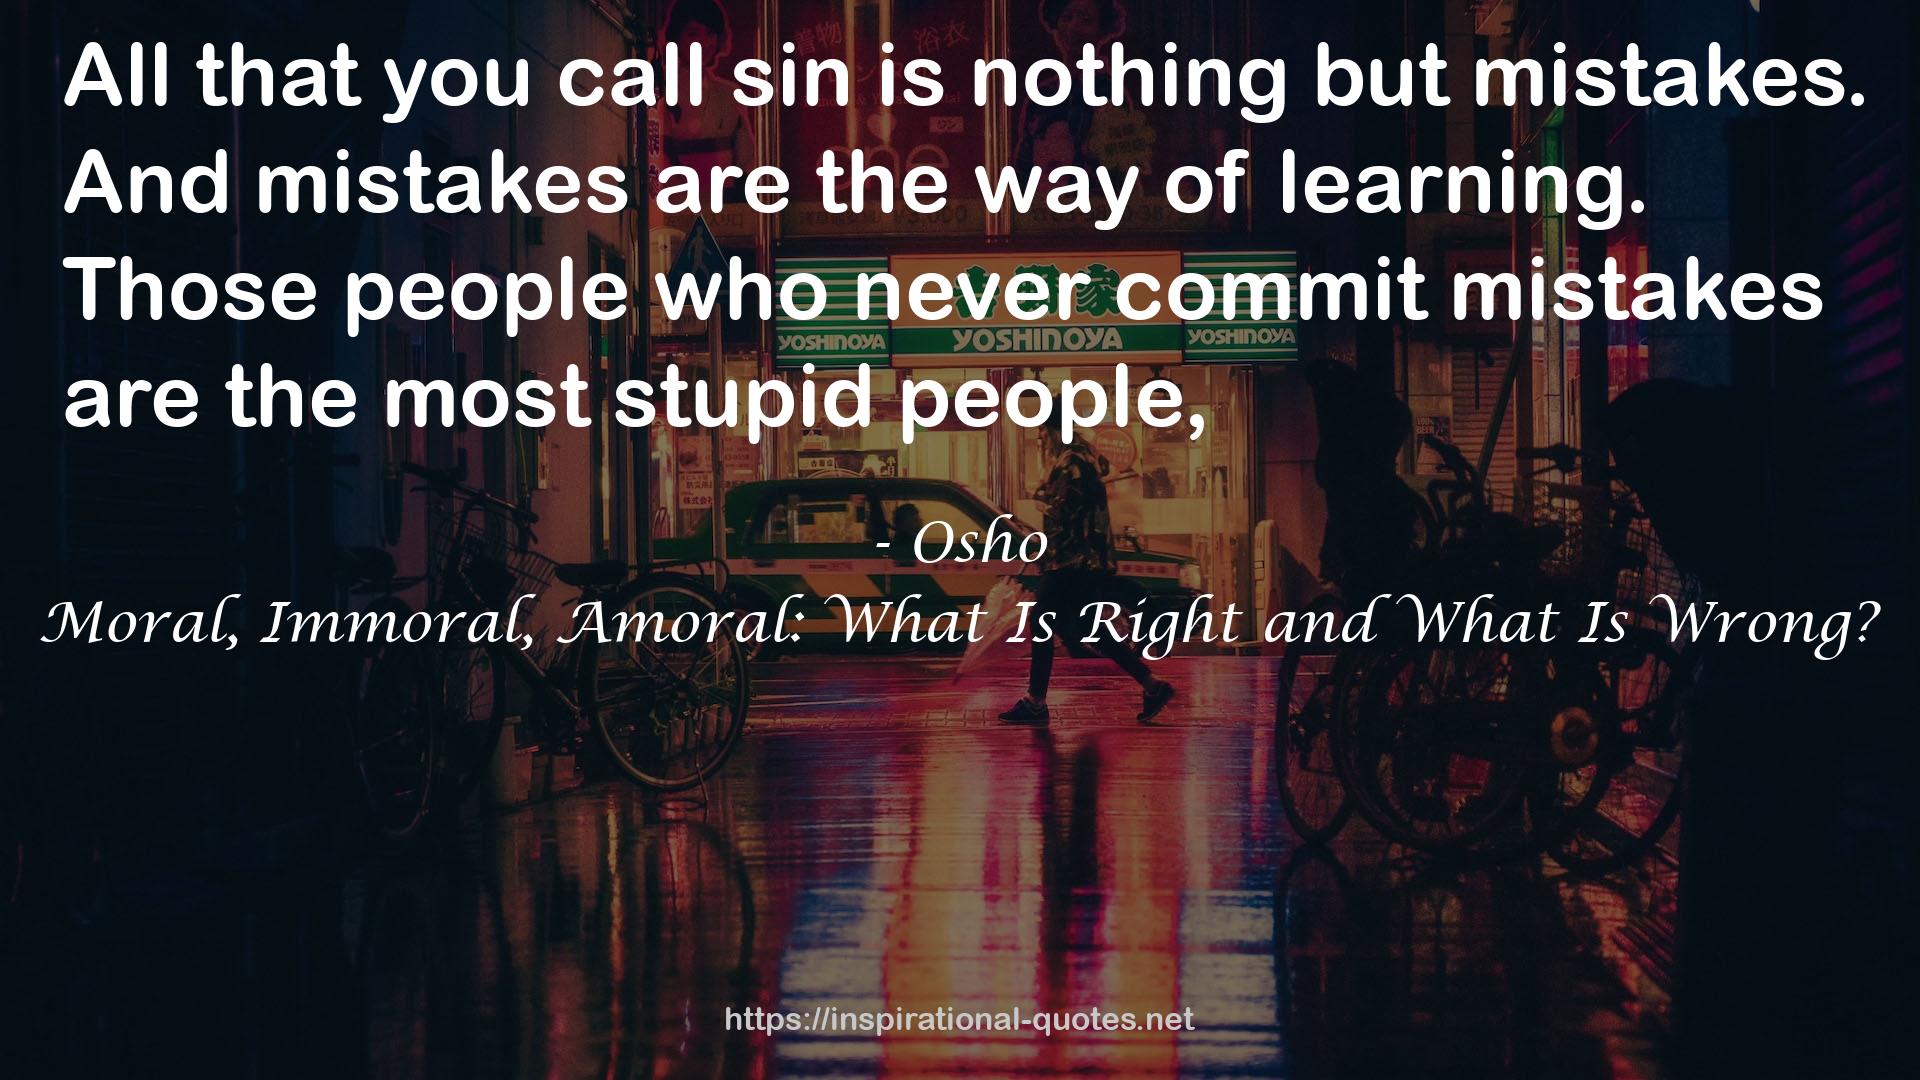 Moral, Immoral, Amoral: What Is Right and What Is Wrong? QUOTES